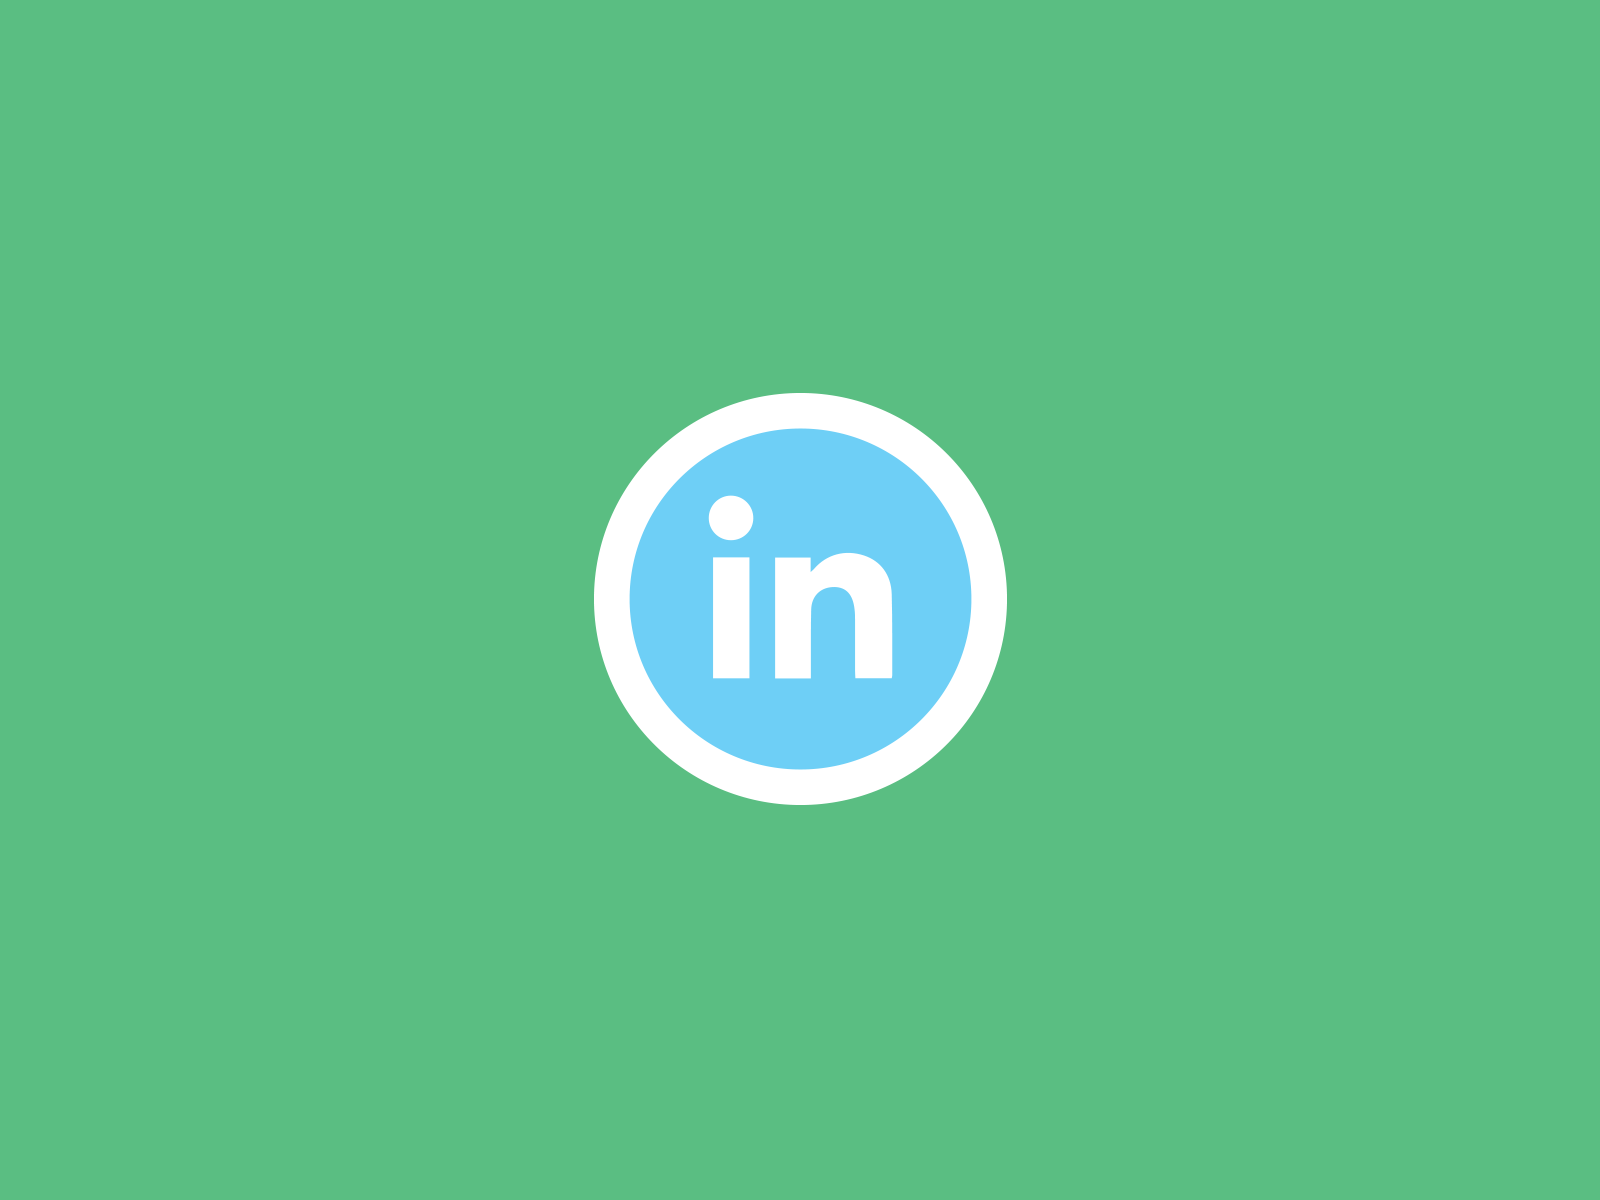 Connect with Brand Oxygen on LinkedIn